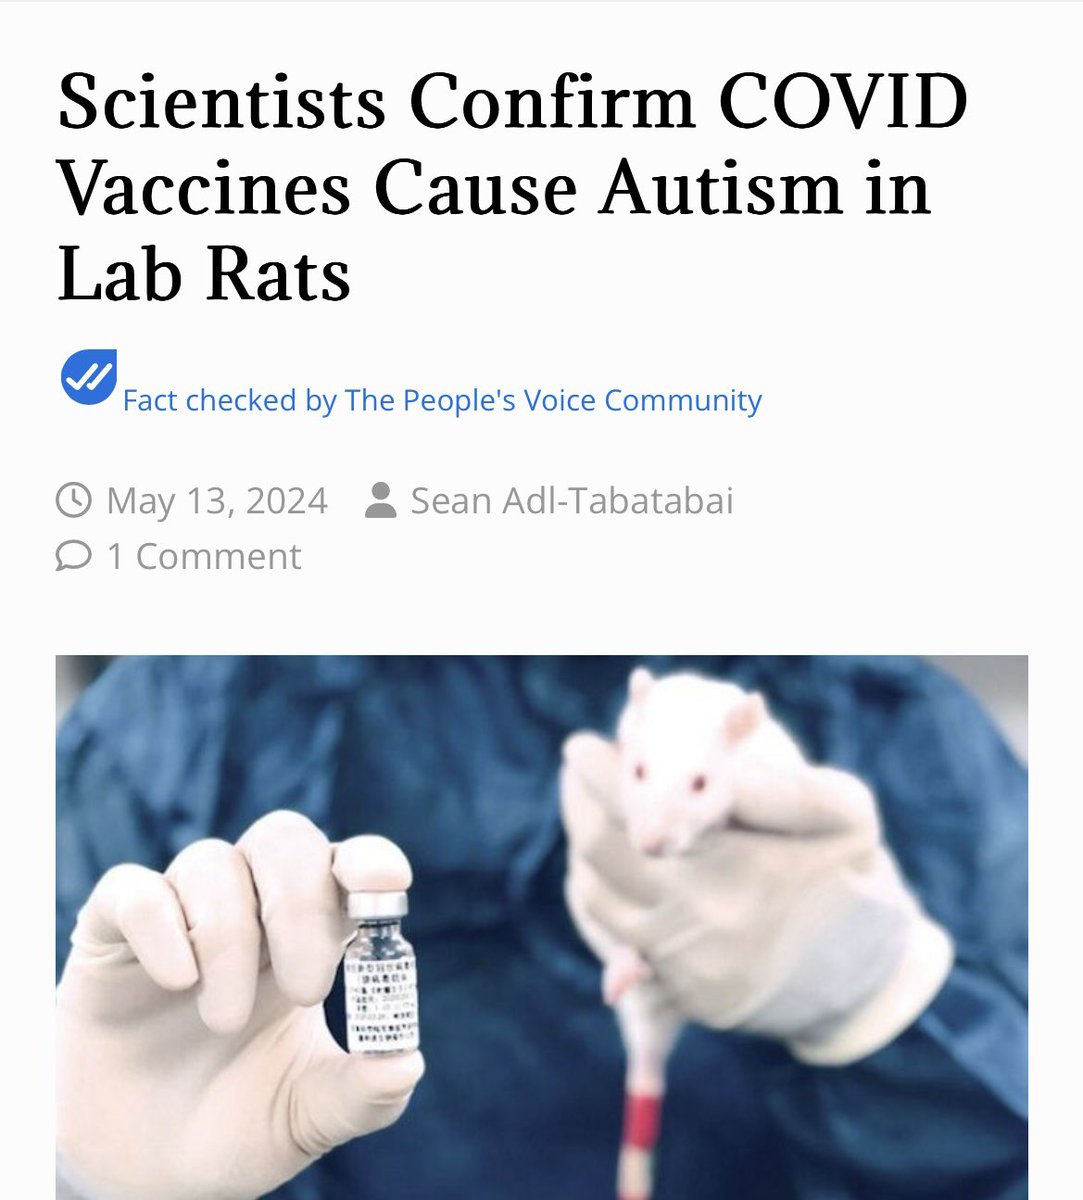 An official new study published in Neurochemical Research has found that lab rats who were given the Pfizer COVID vaccine developed ‘autism-like’ traits.